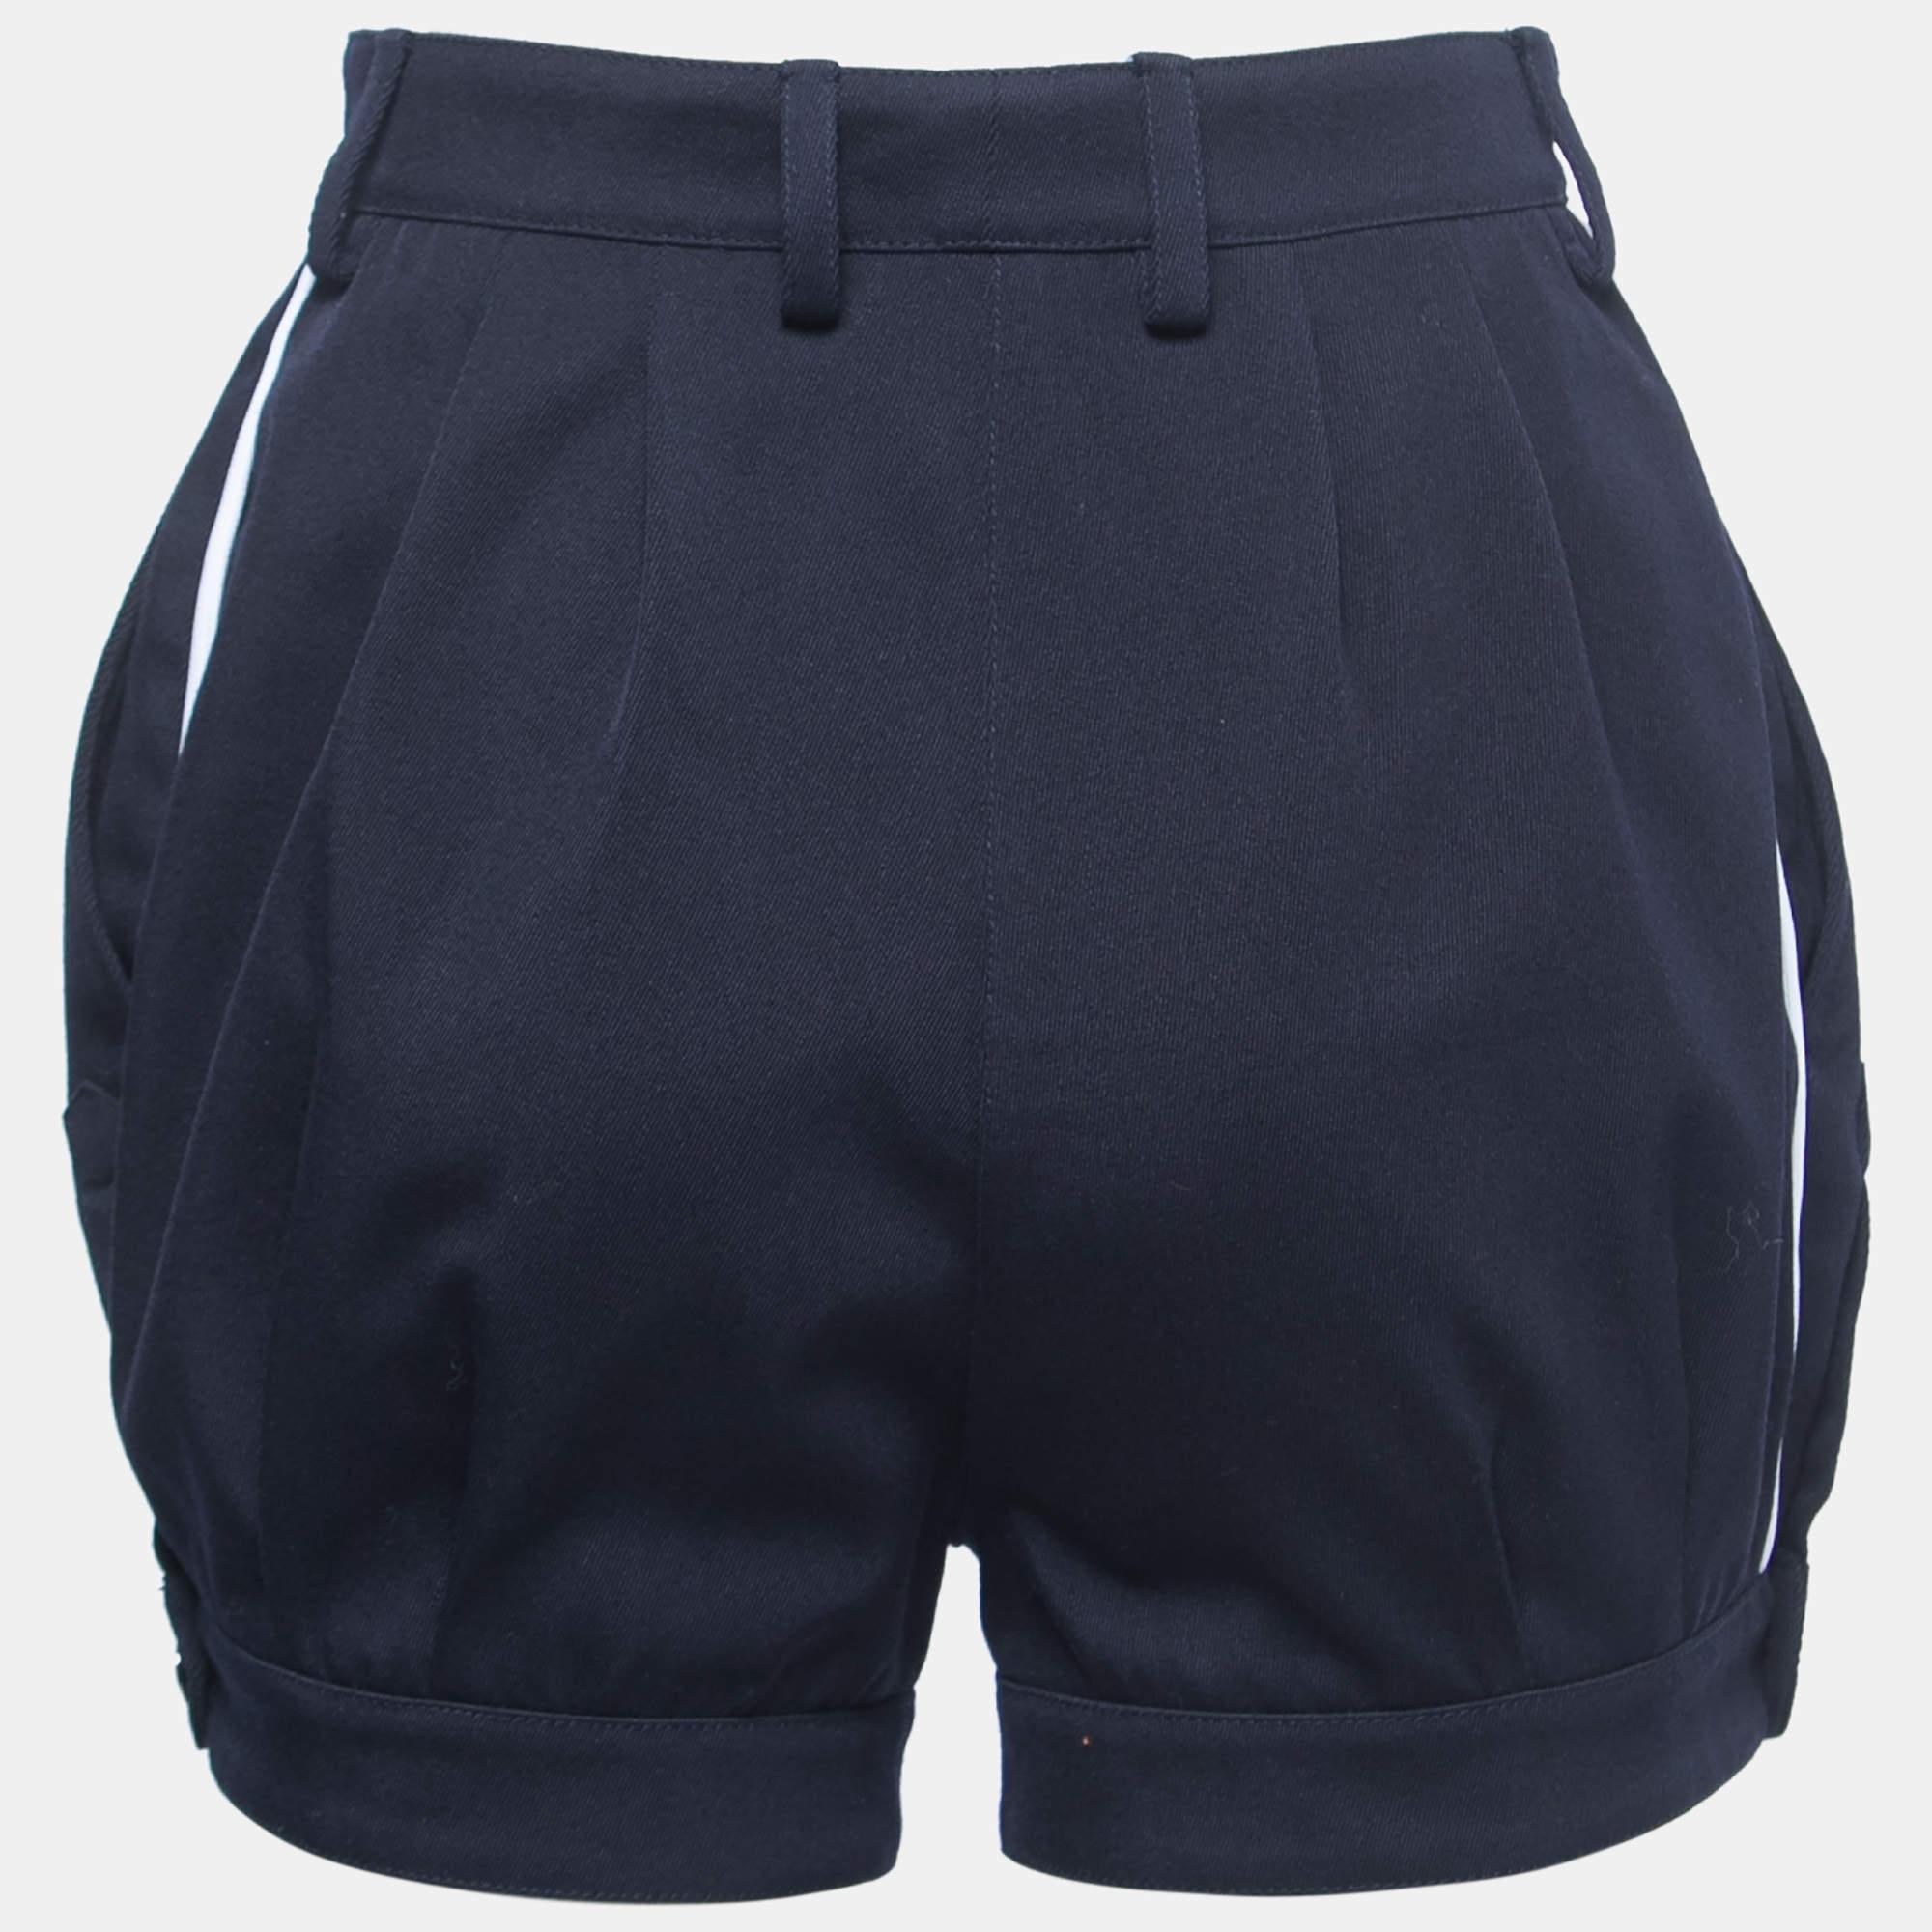 Crafted from high-quality wool, they offer a comfortable and luxurious feel. With a rich navy blue color, these shorts exude sophistication and can be dressed up or down for various occasions.

